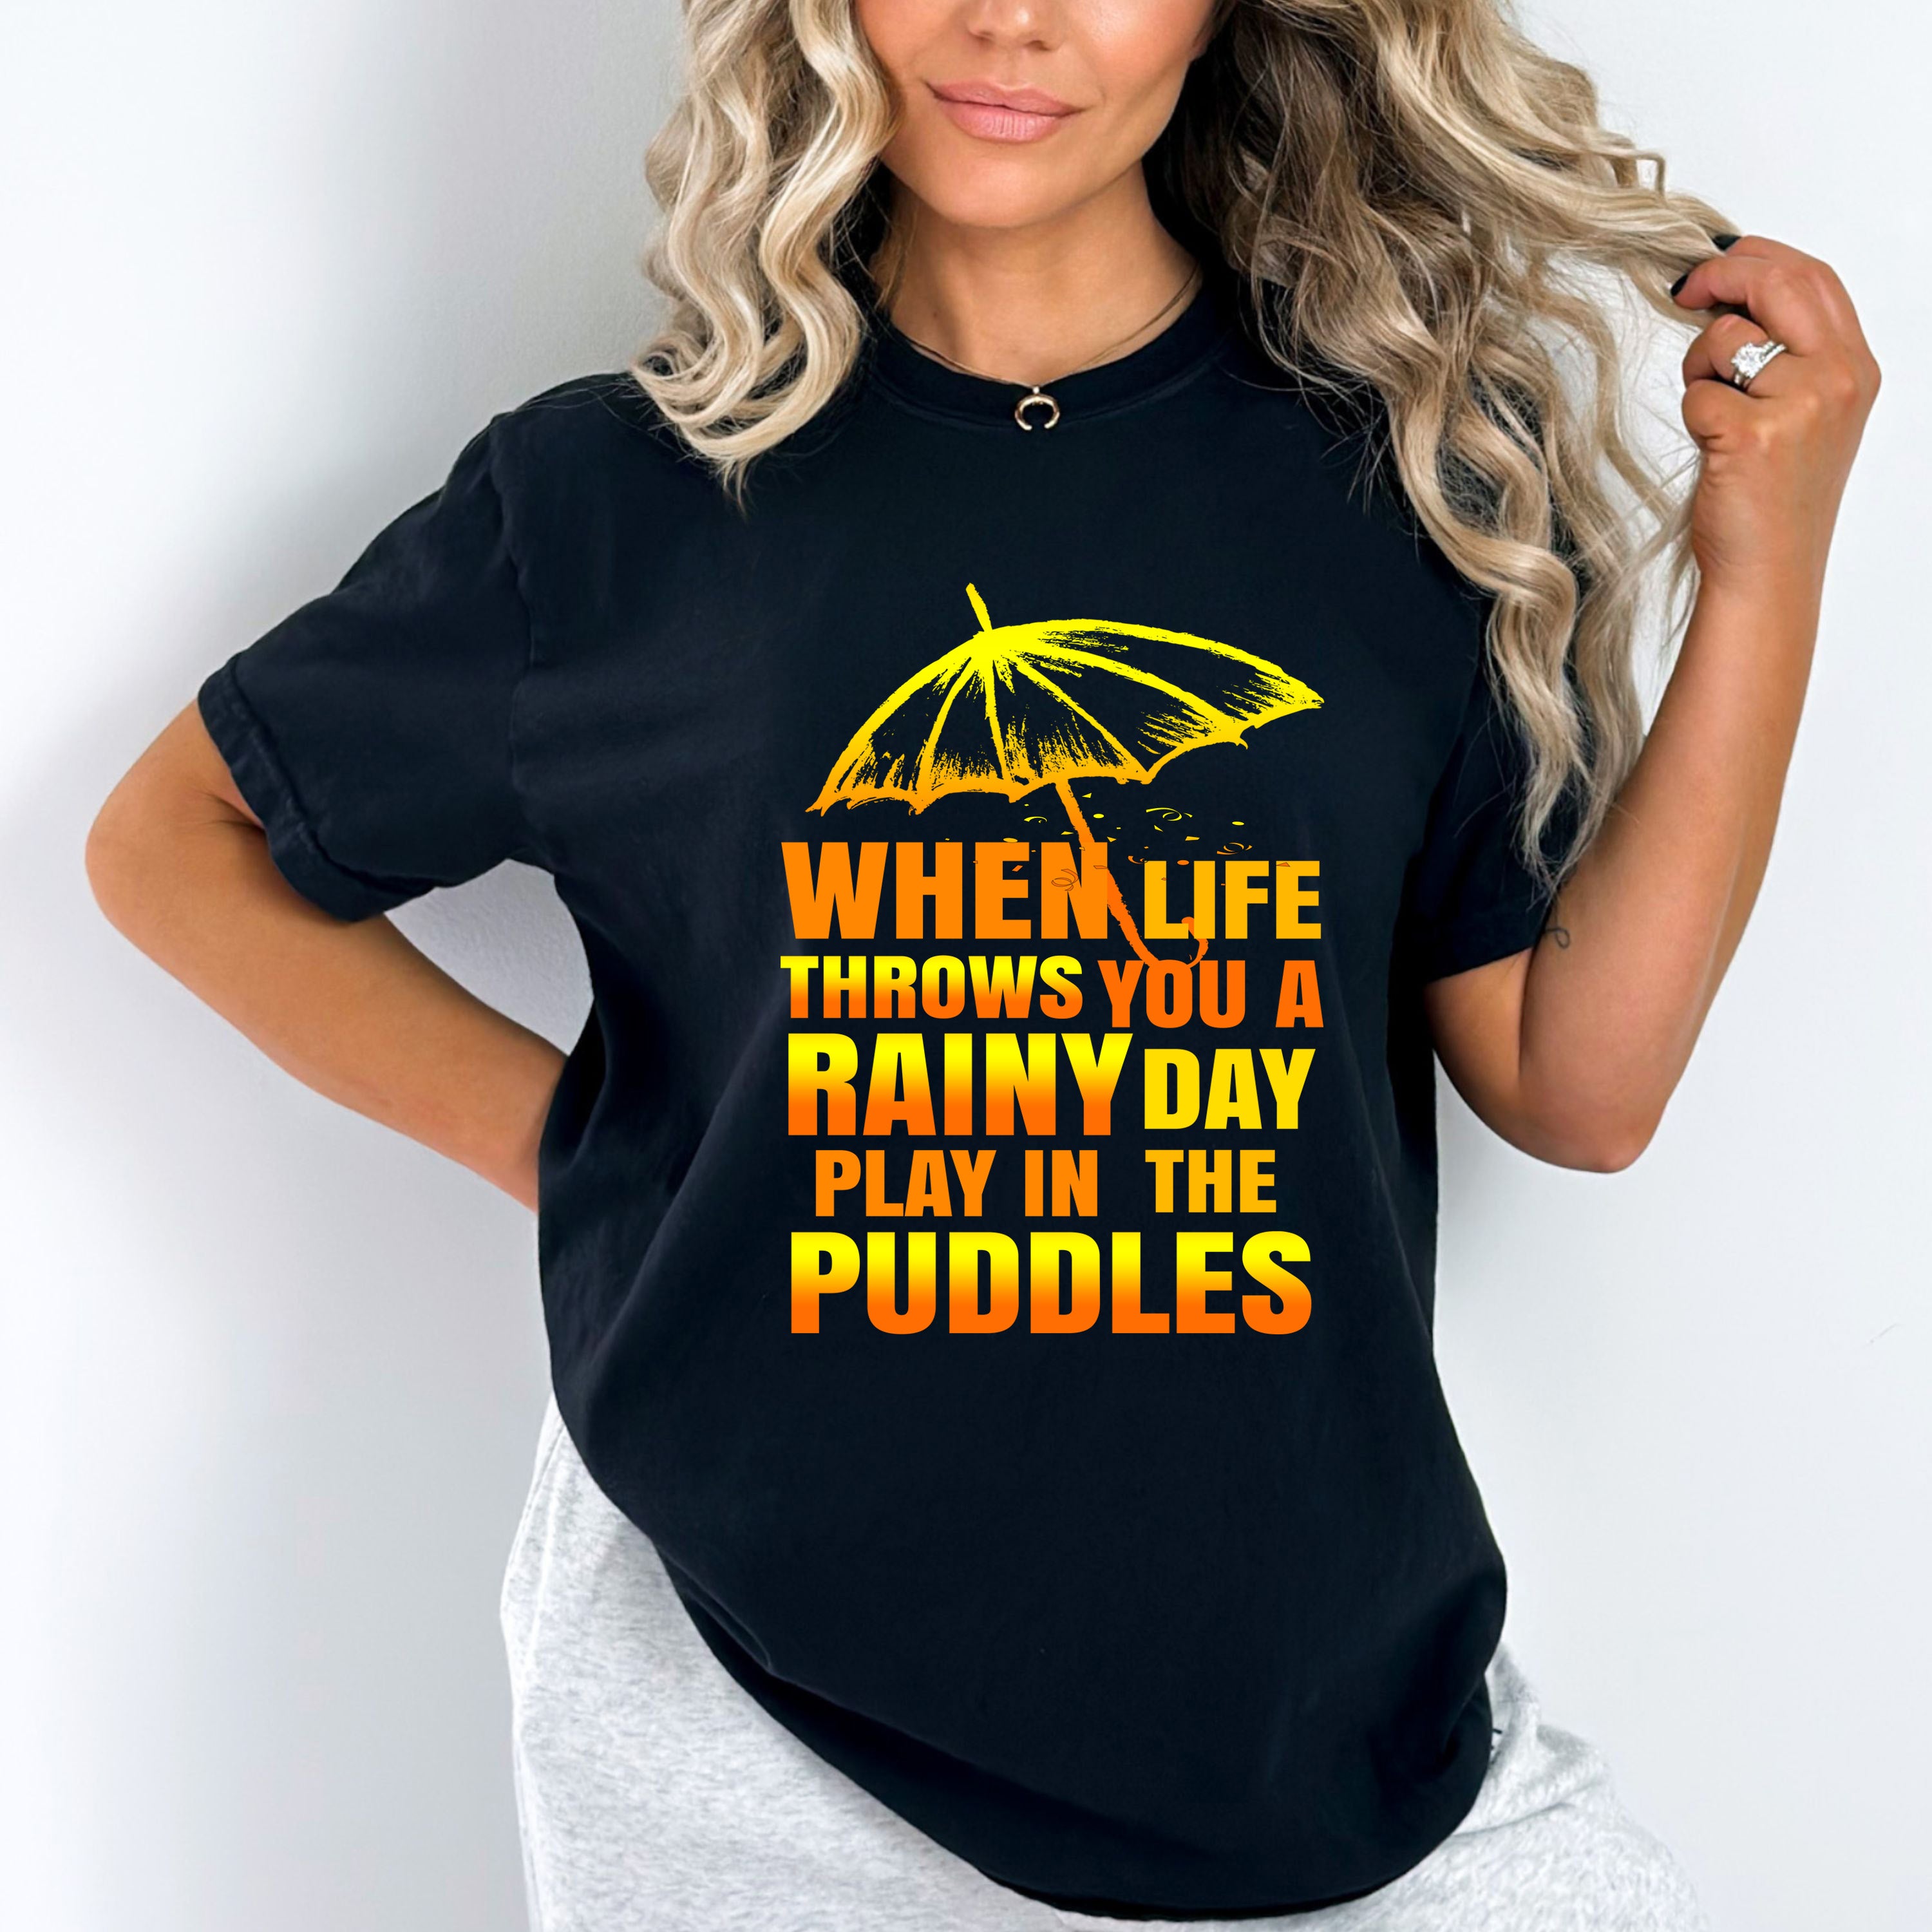 "PLAY IN THE PUDDLES"T-SHIRT